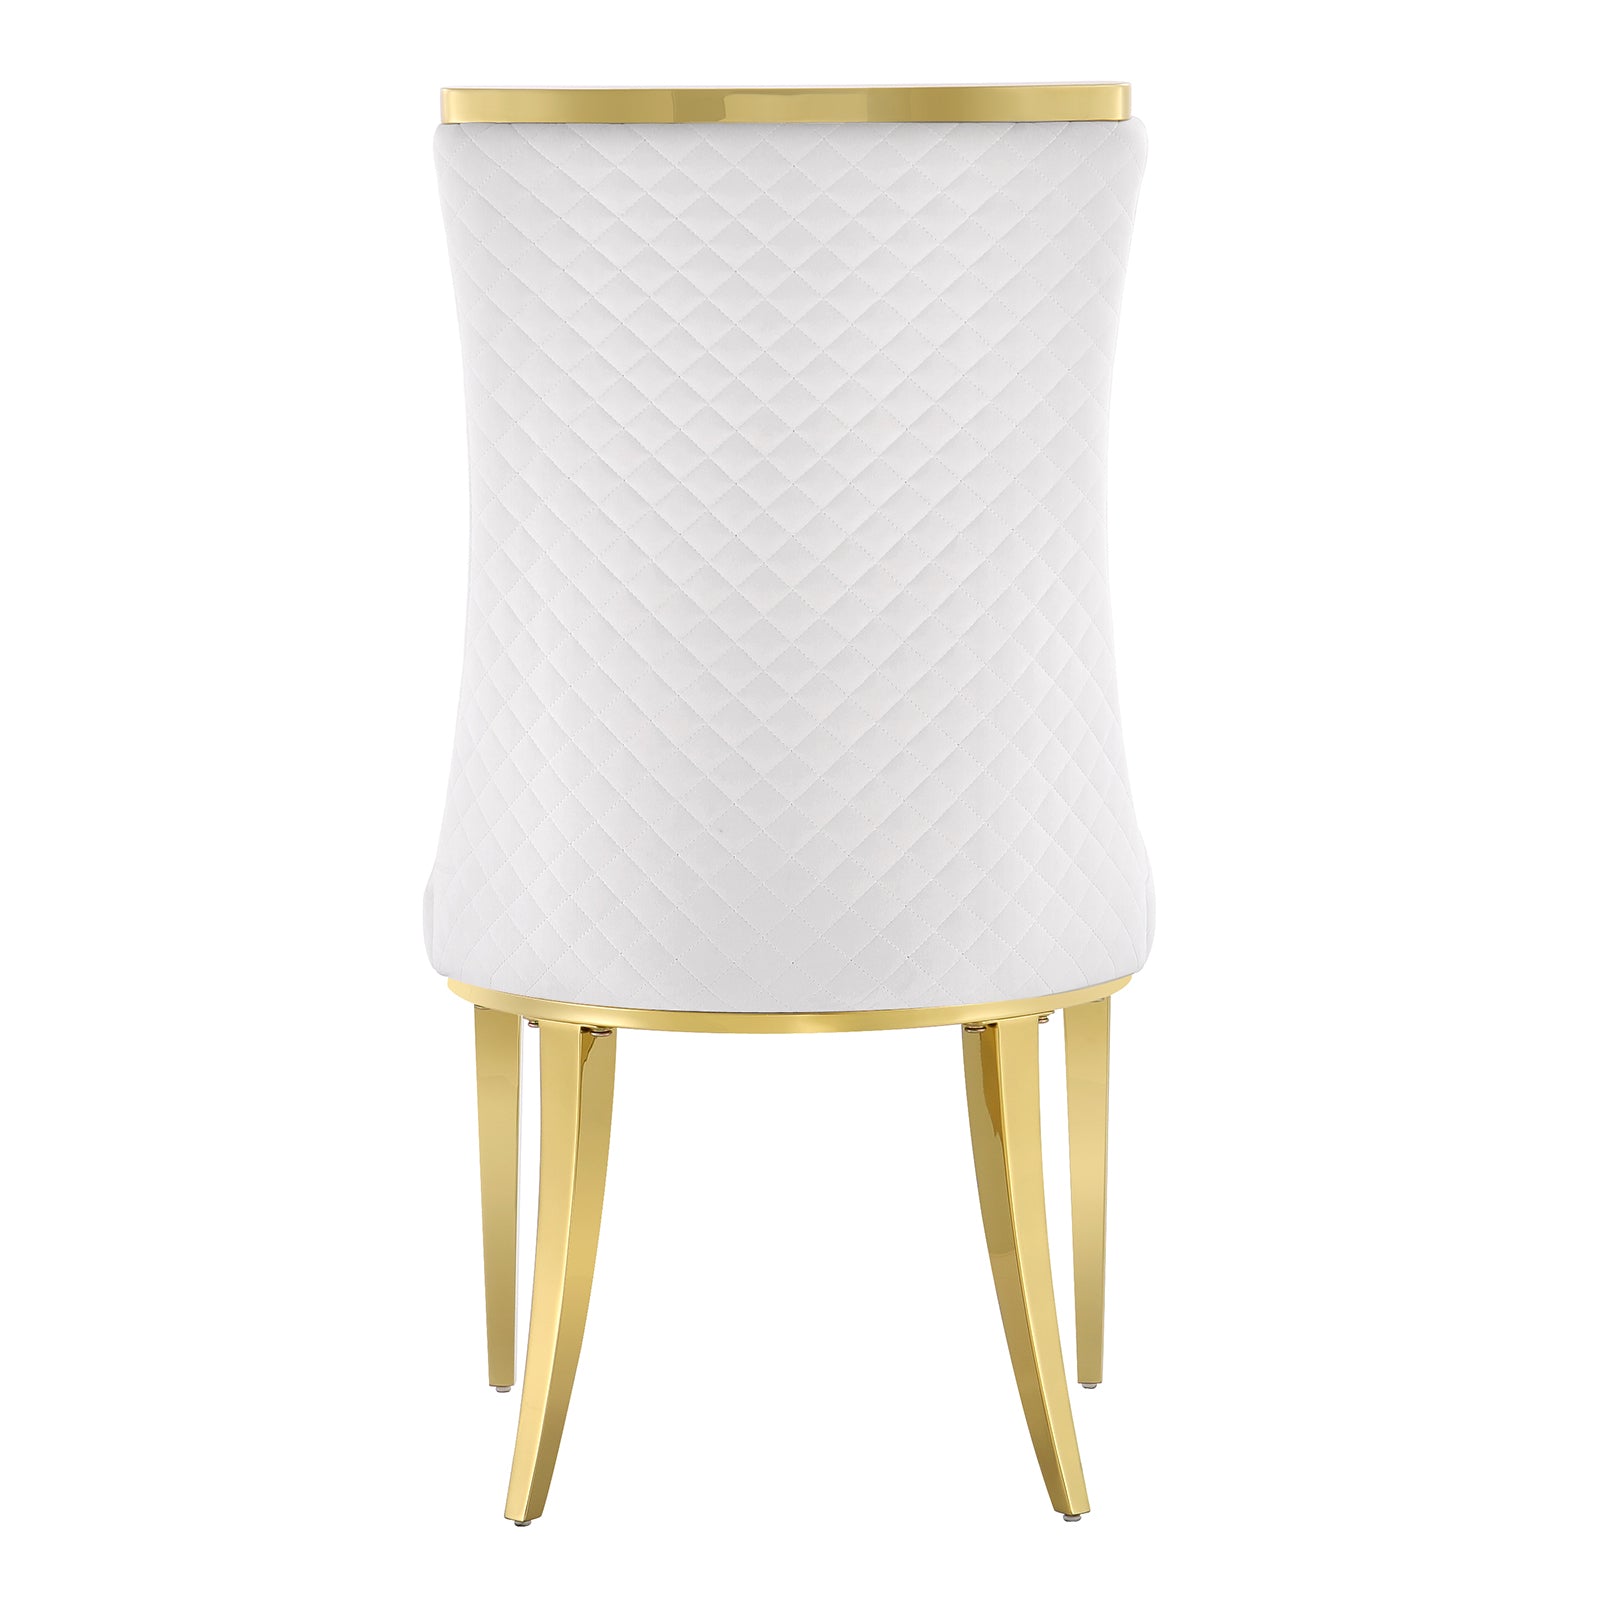 718 Set | AUZ White and Gold Dining room Sets for 6